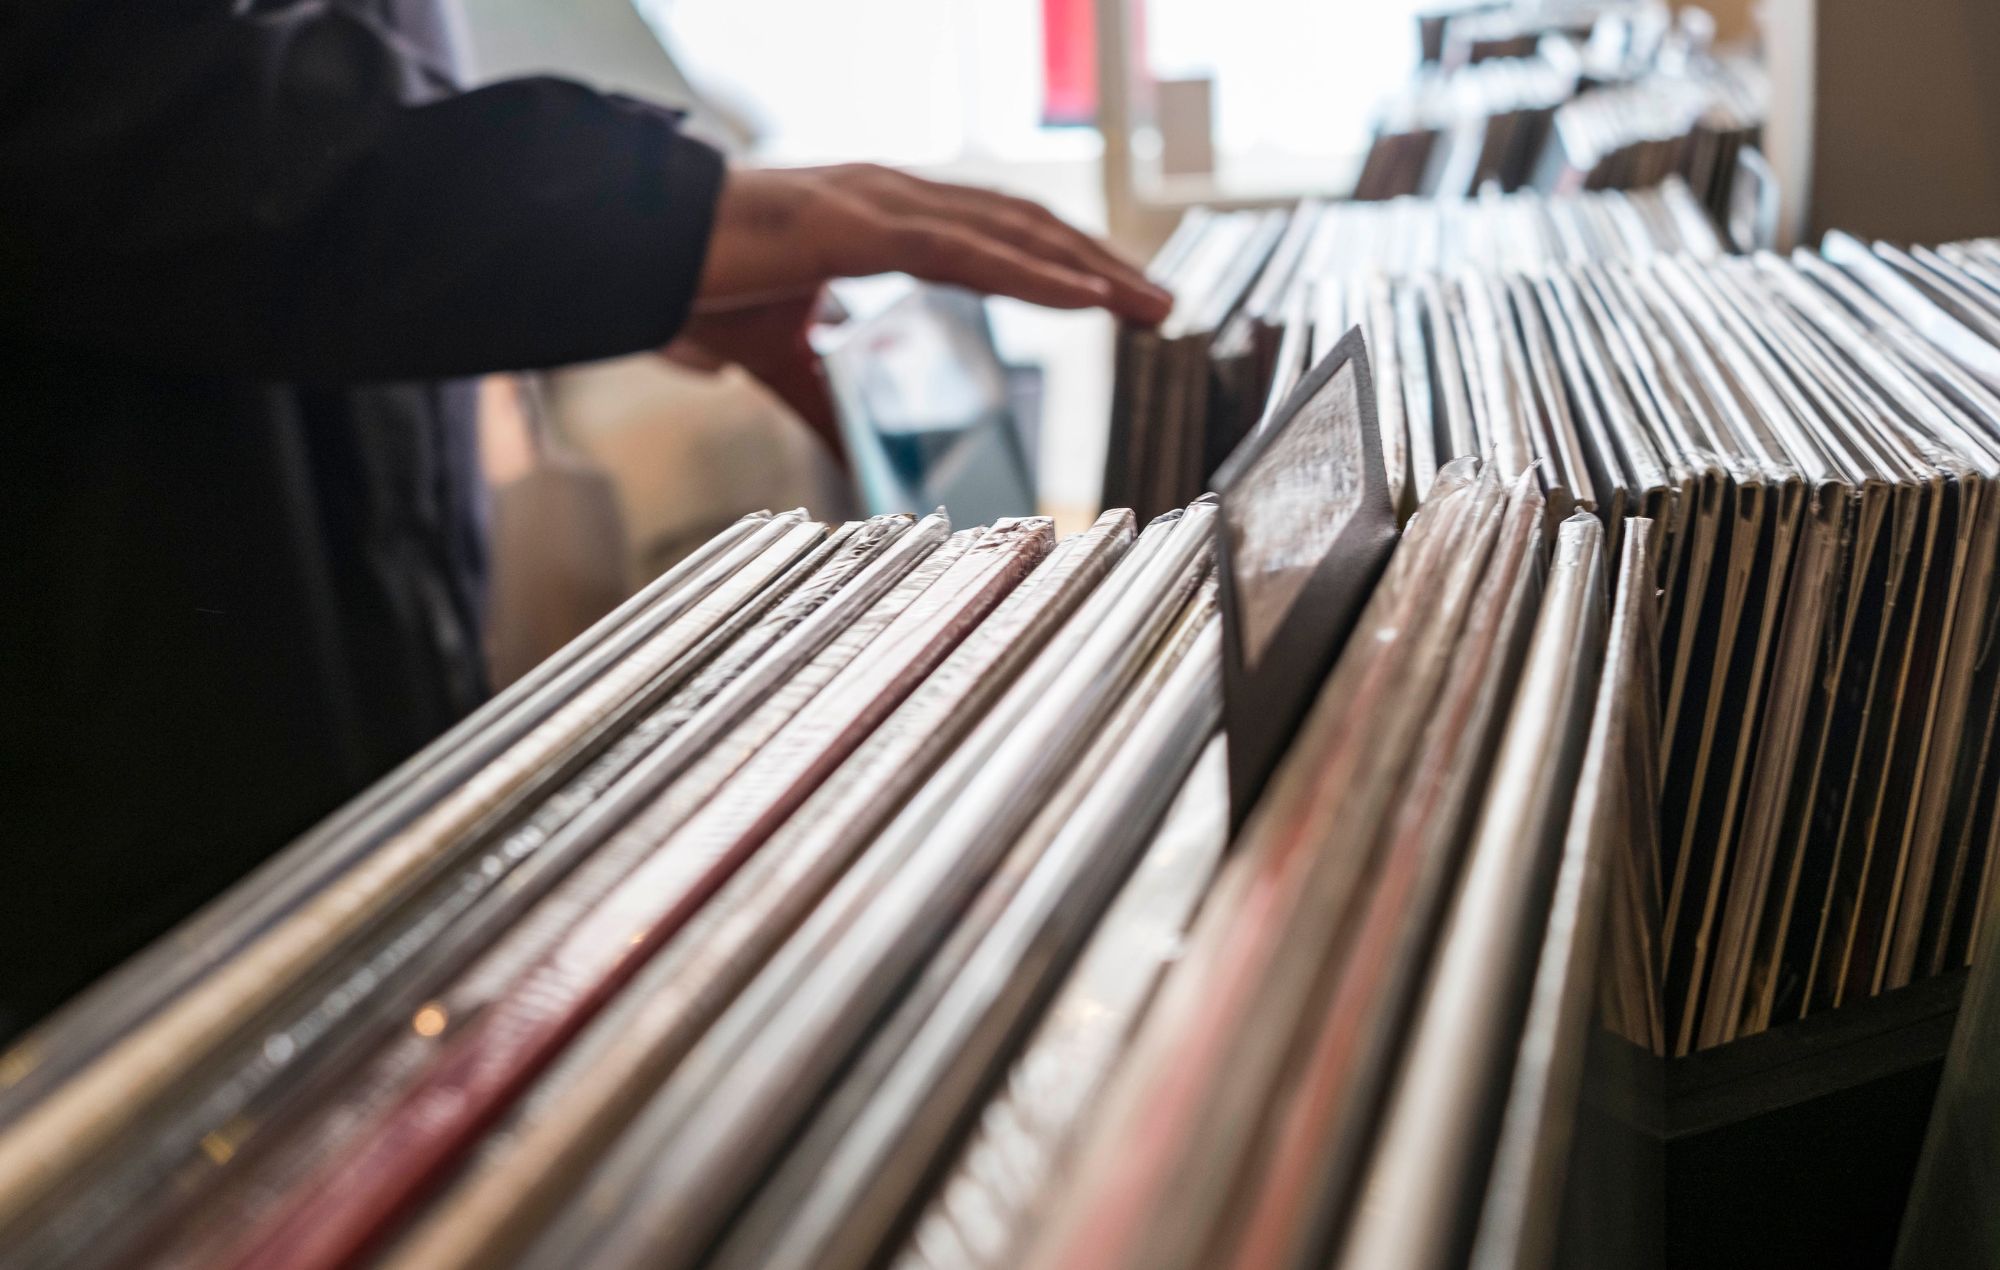 Browsing vinyl LPs in record store - stock photo